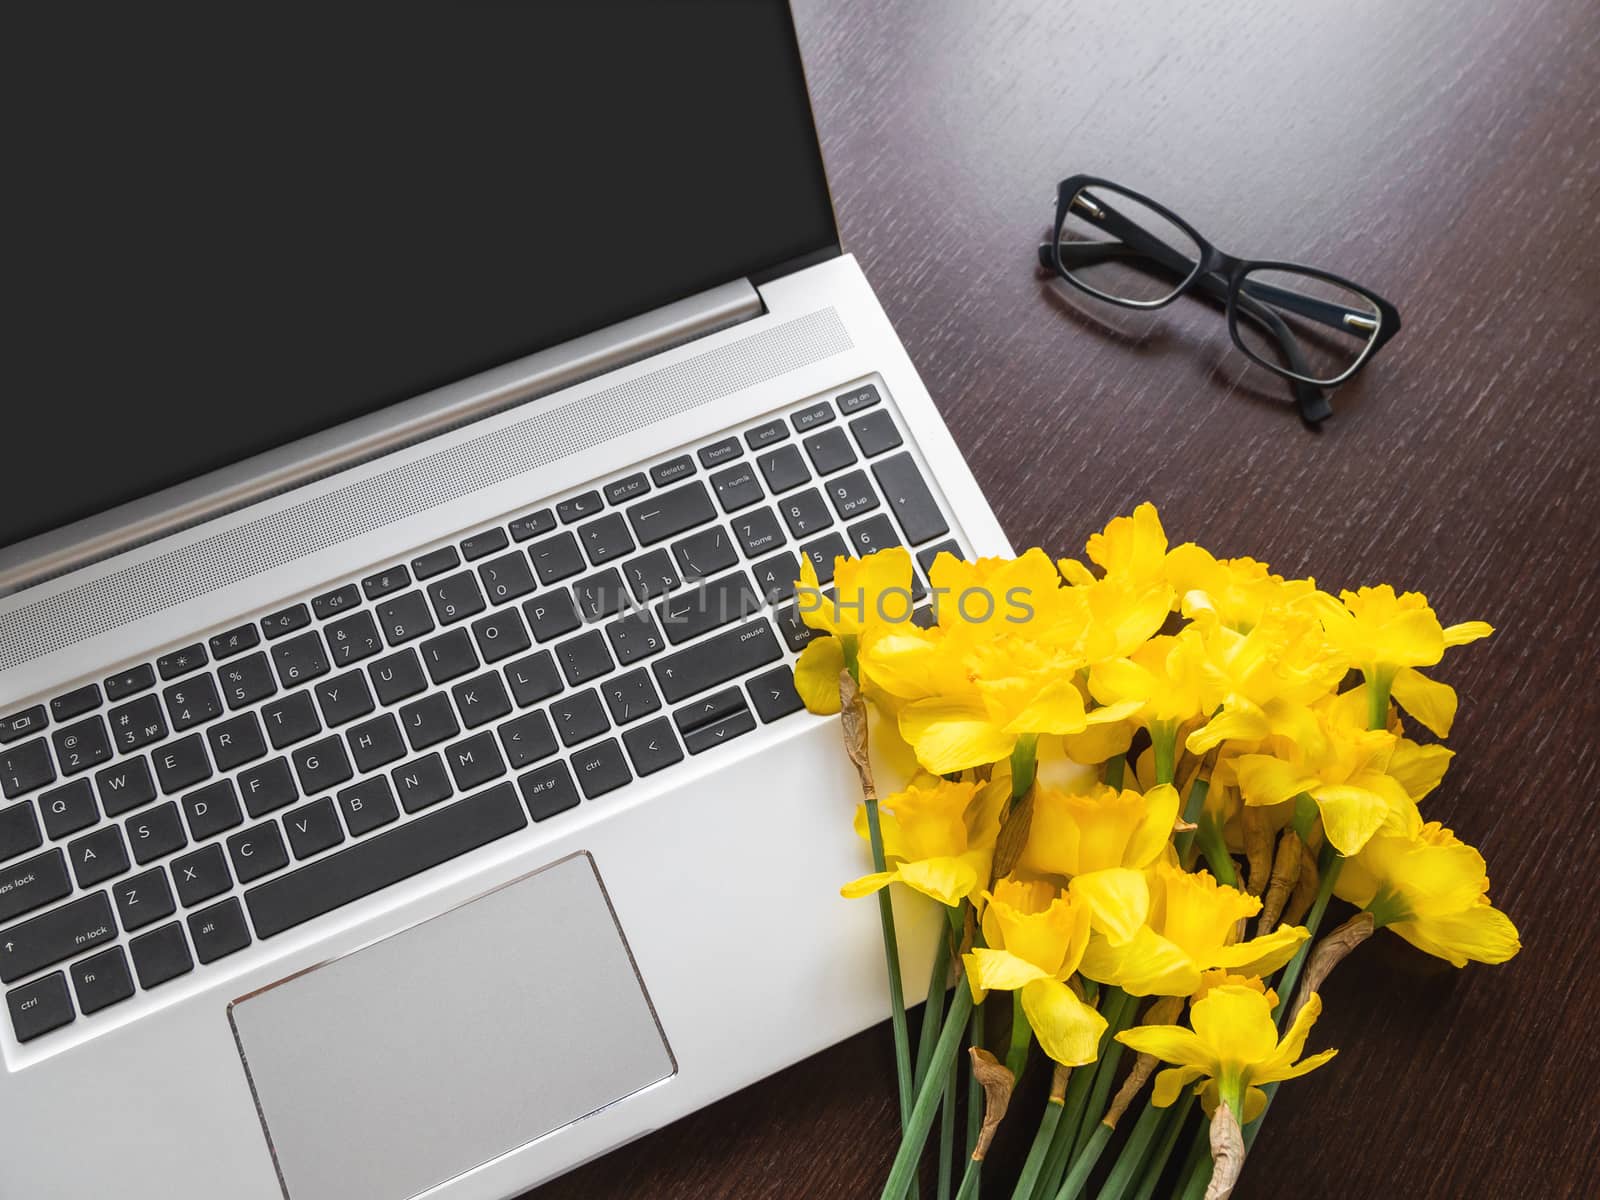 Bouquet of Narcissus or daffodils lying on silver metal laptop. Bright yellow flowers on portable device. Wooden background with glasses. by aksenovko